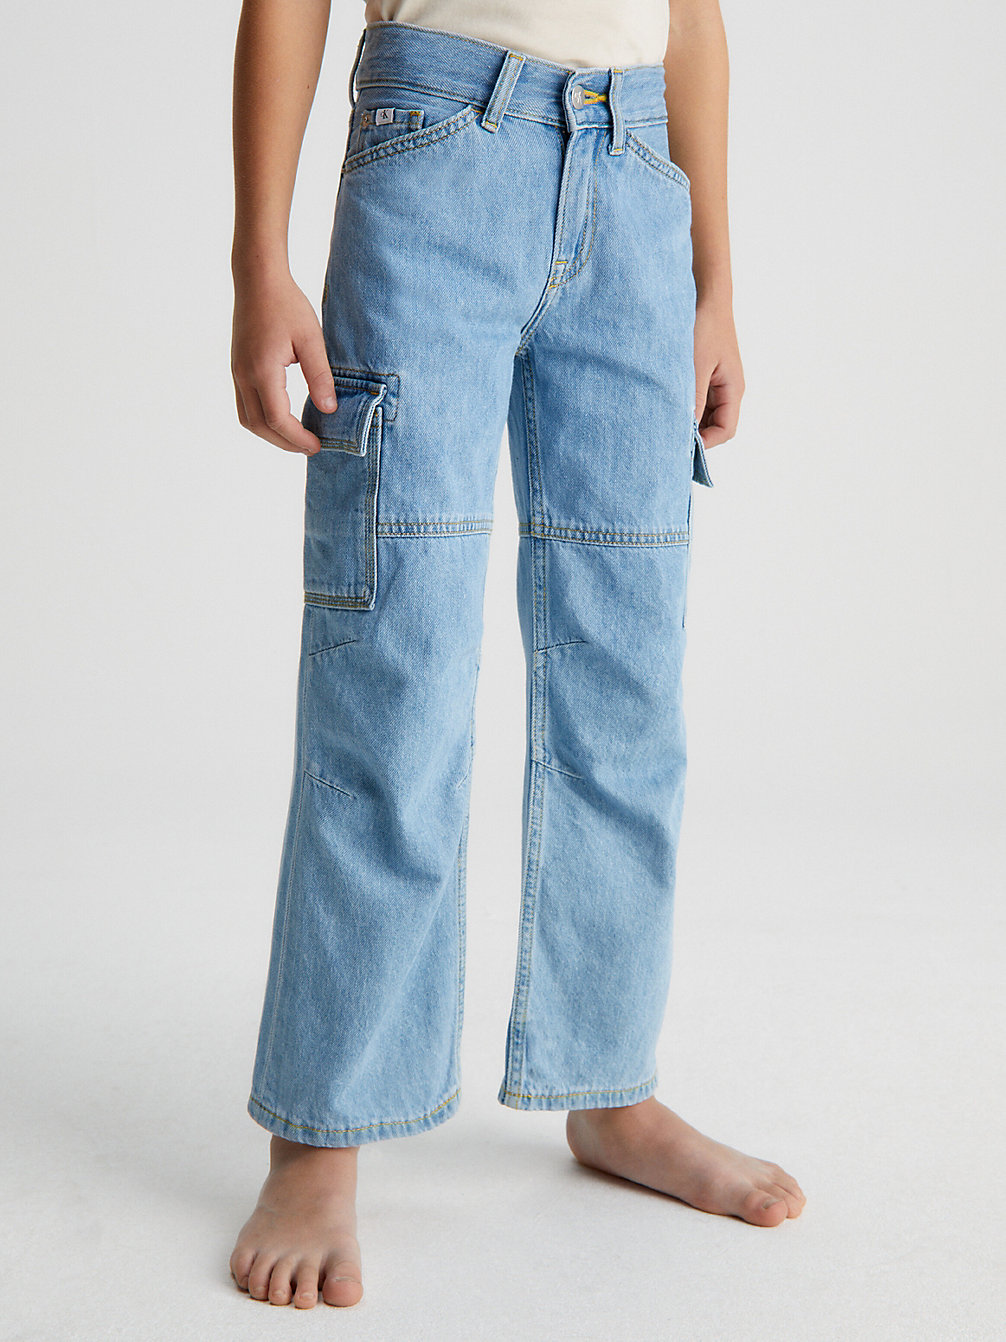 UTILITY WASHED BLUE > Relaxed Skater Jeans > undefined boys - Calvin Klein